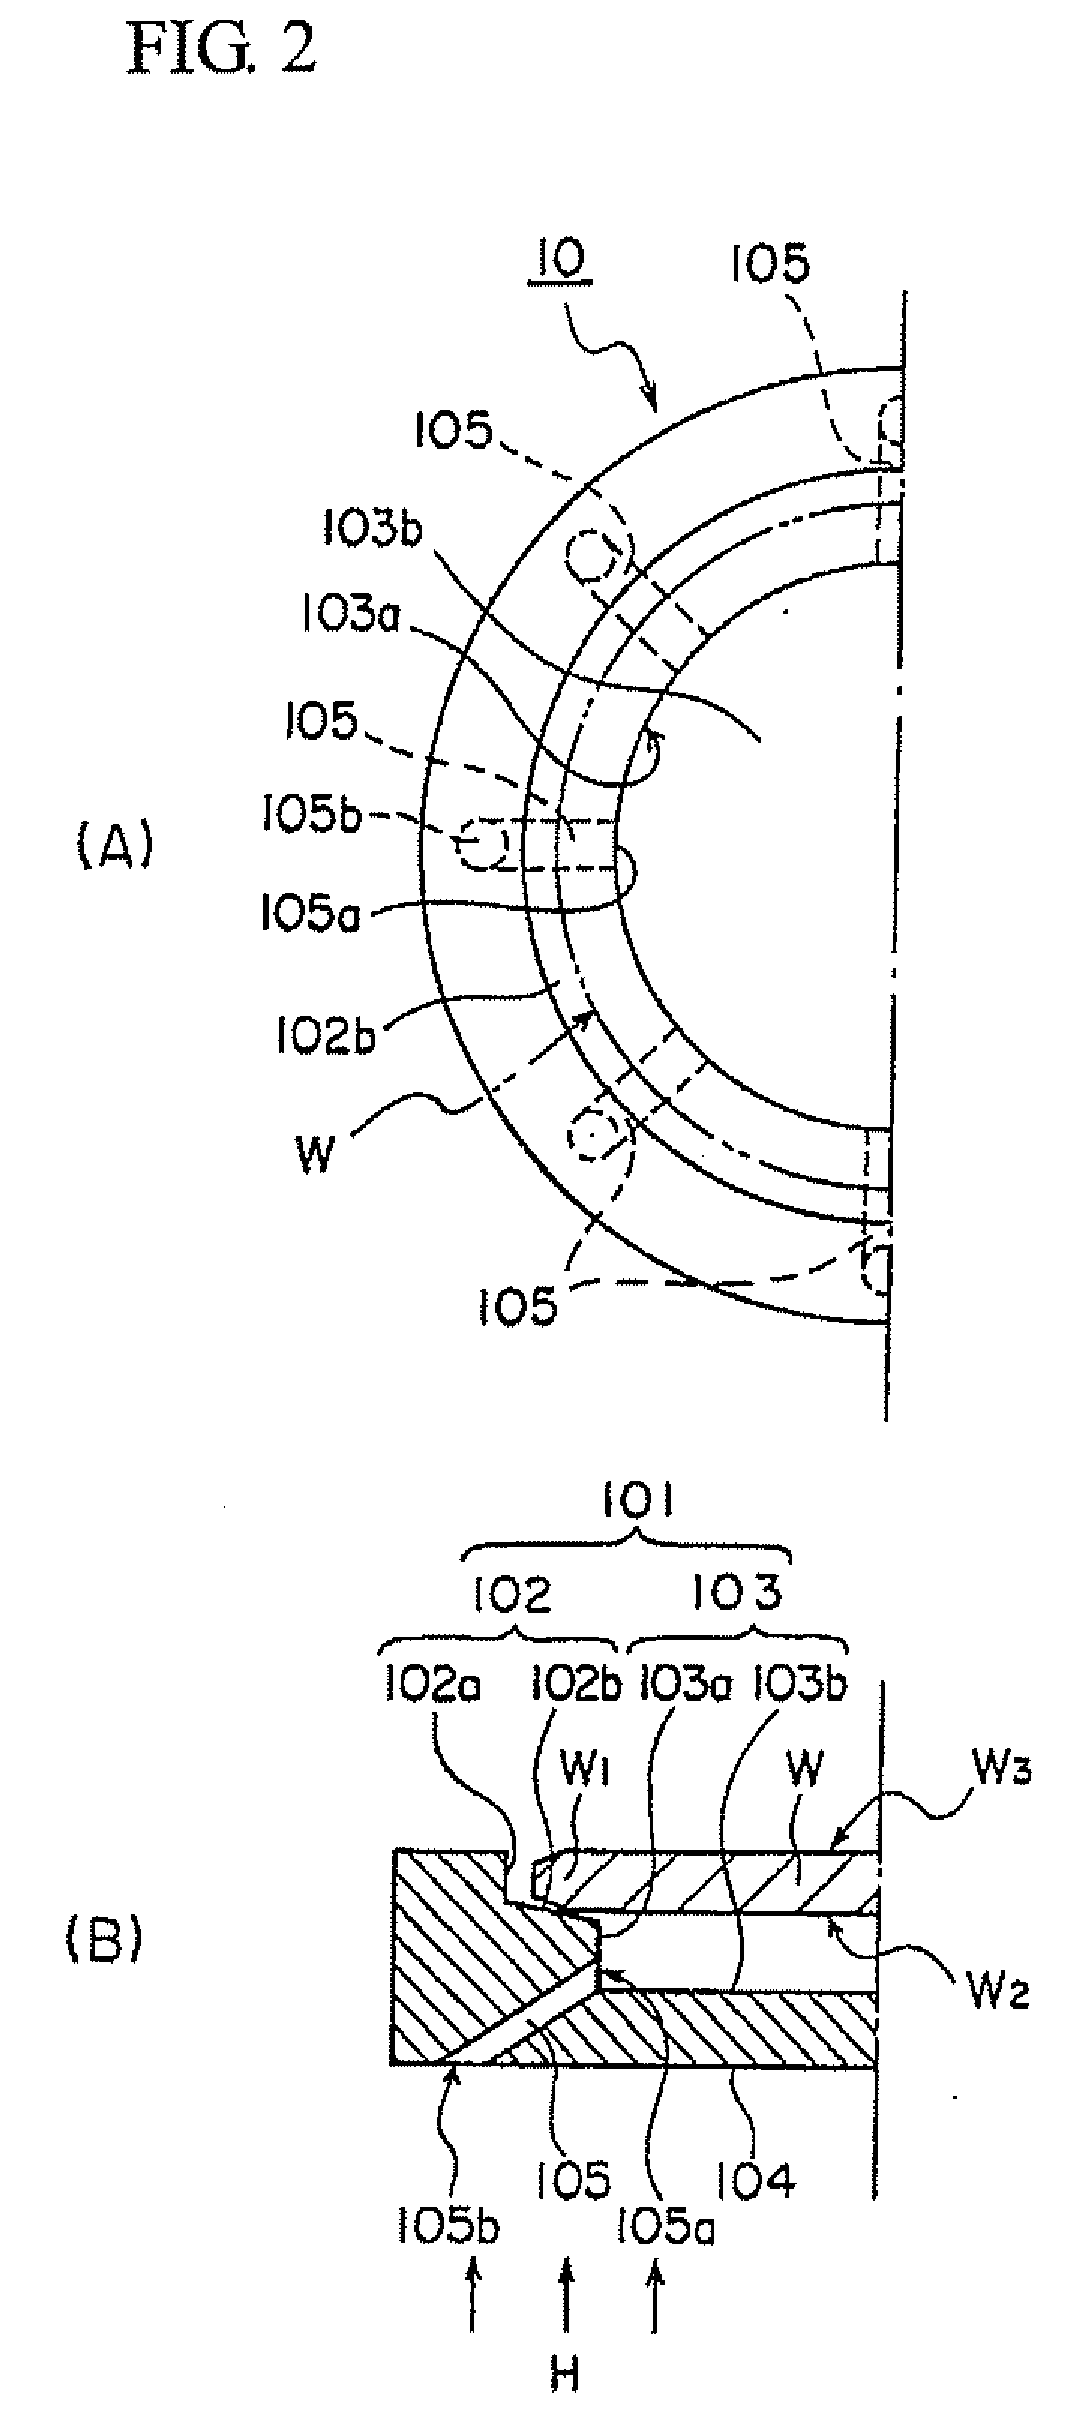 Susceptor For Vapor-Phase Growth Reactor